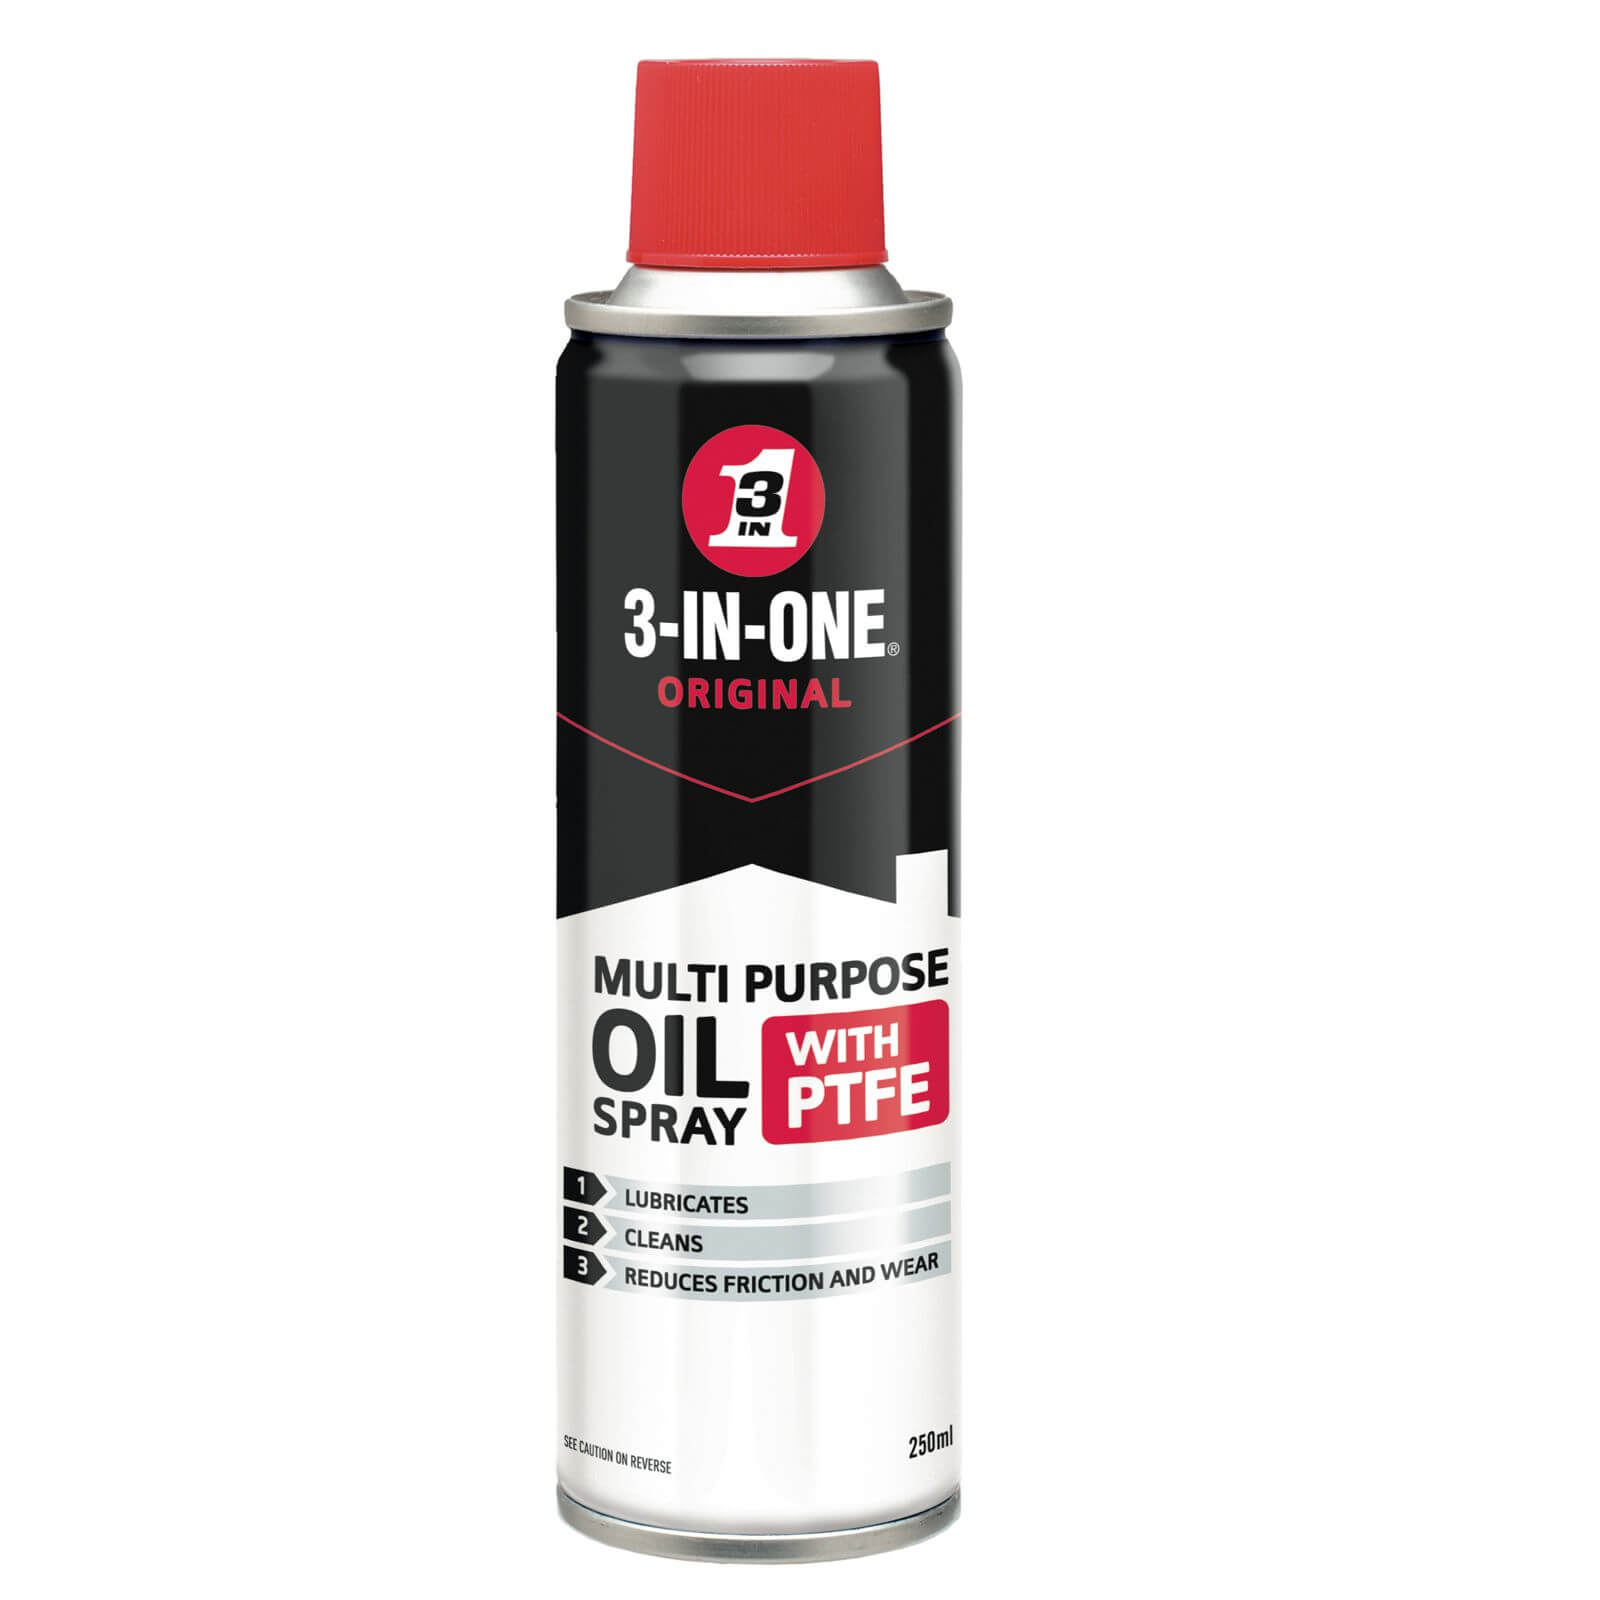 3-In-One Oil with PTFE - 250ml